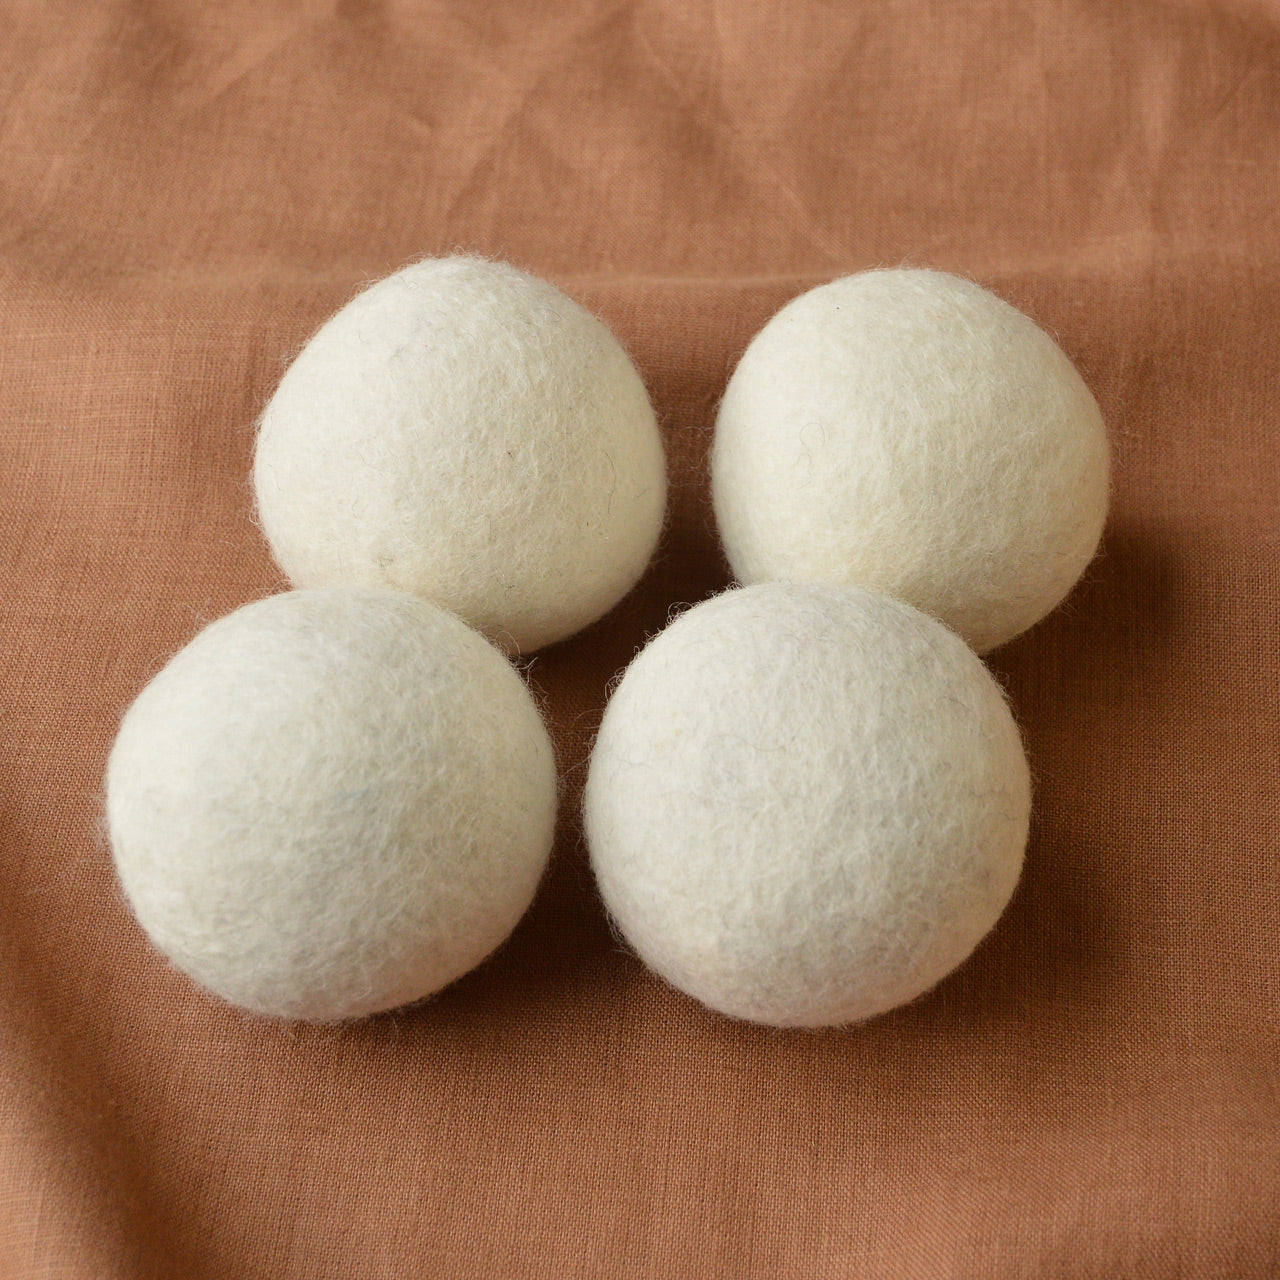 Laundry Dryer Balls - 100% Recycled Wool